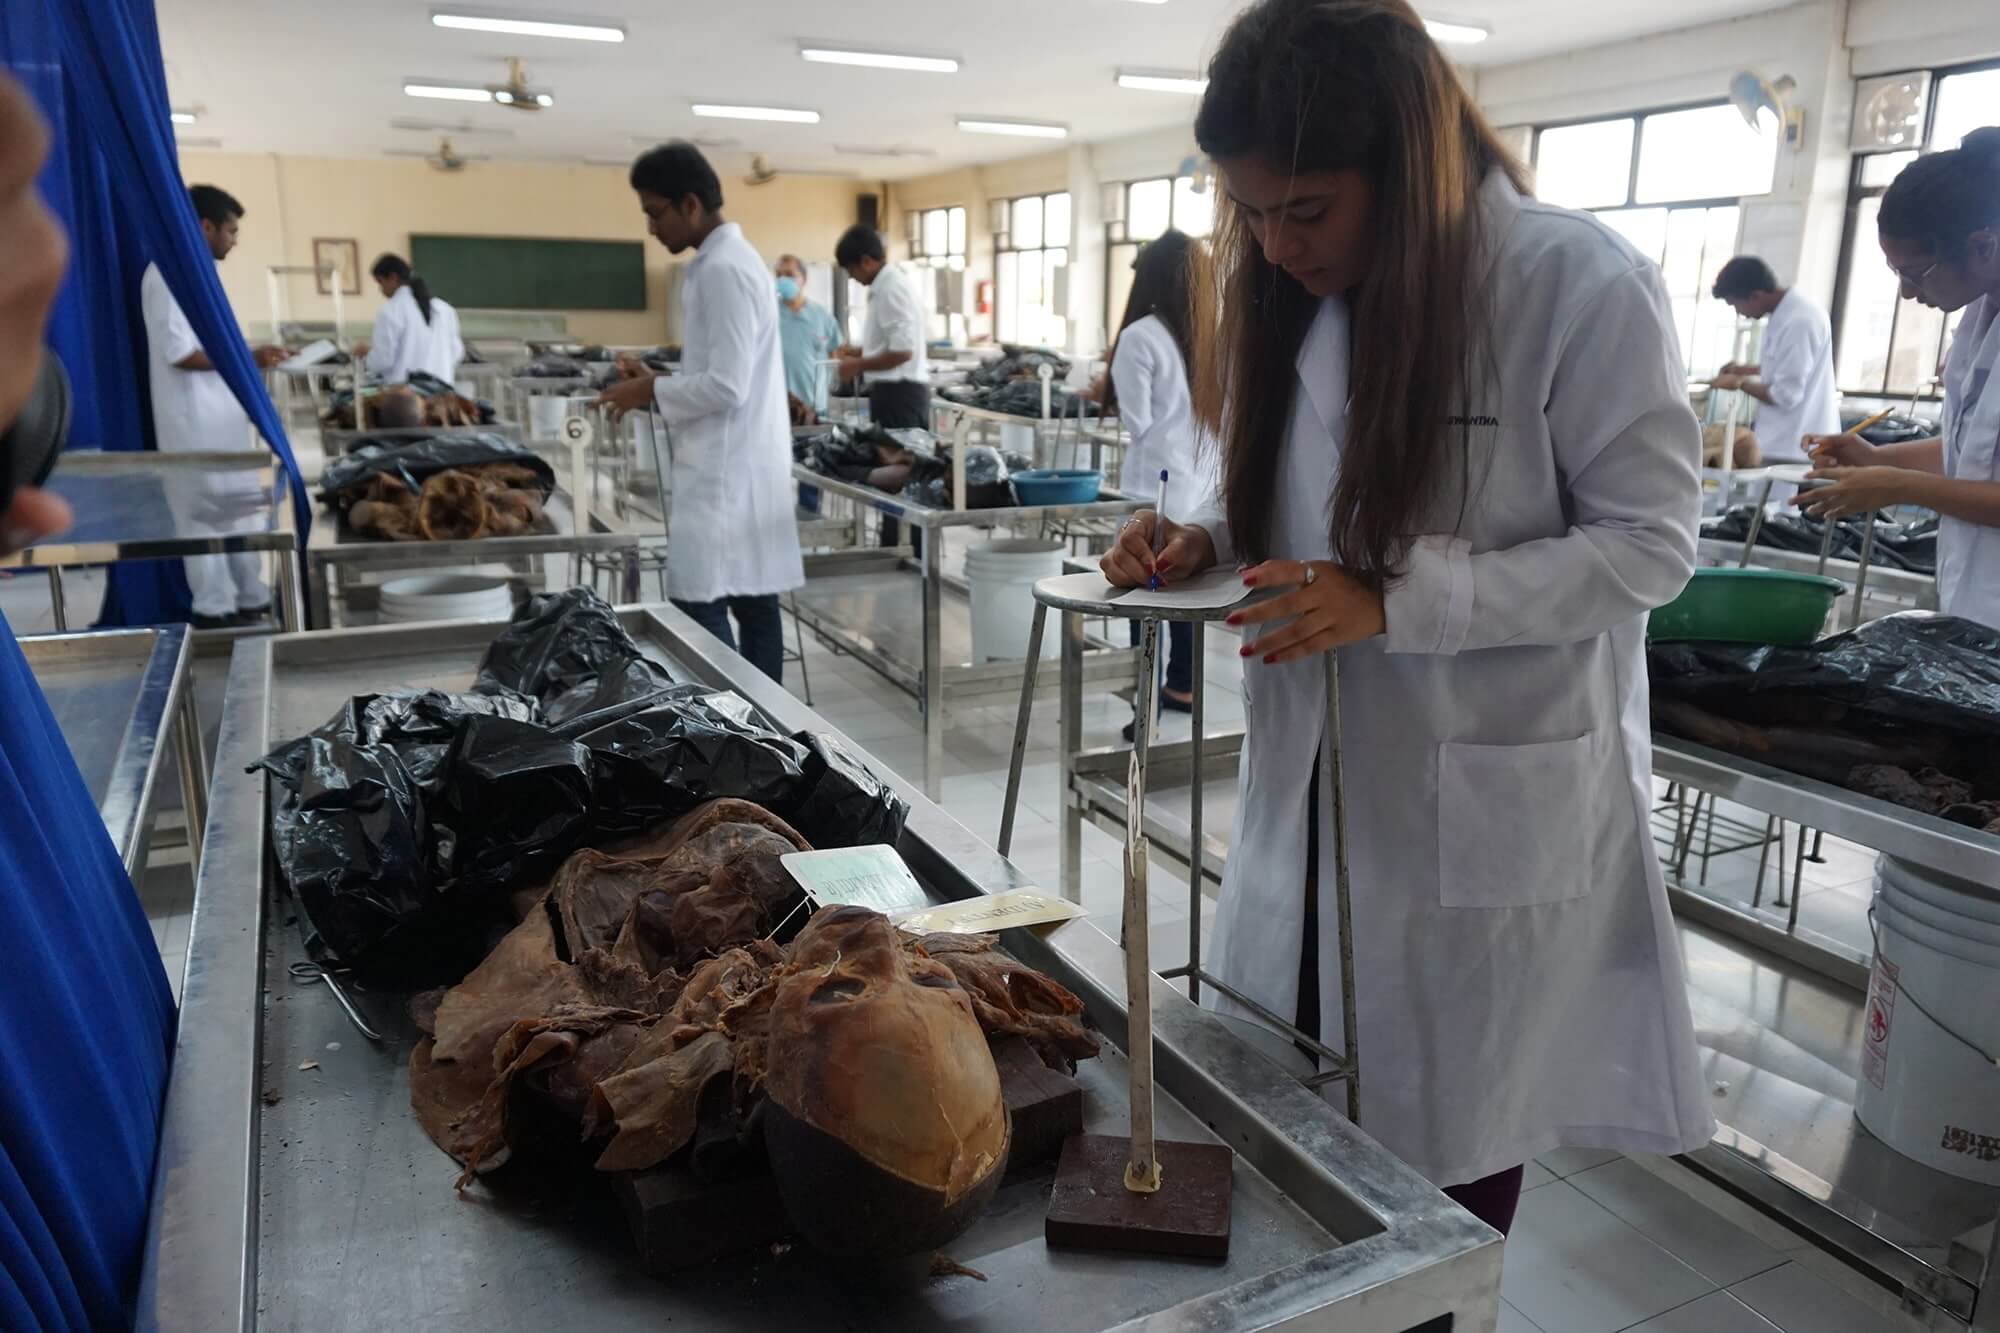 Over 50 cadavers to practice on